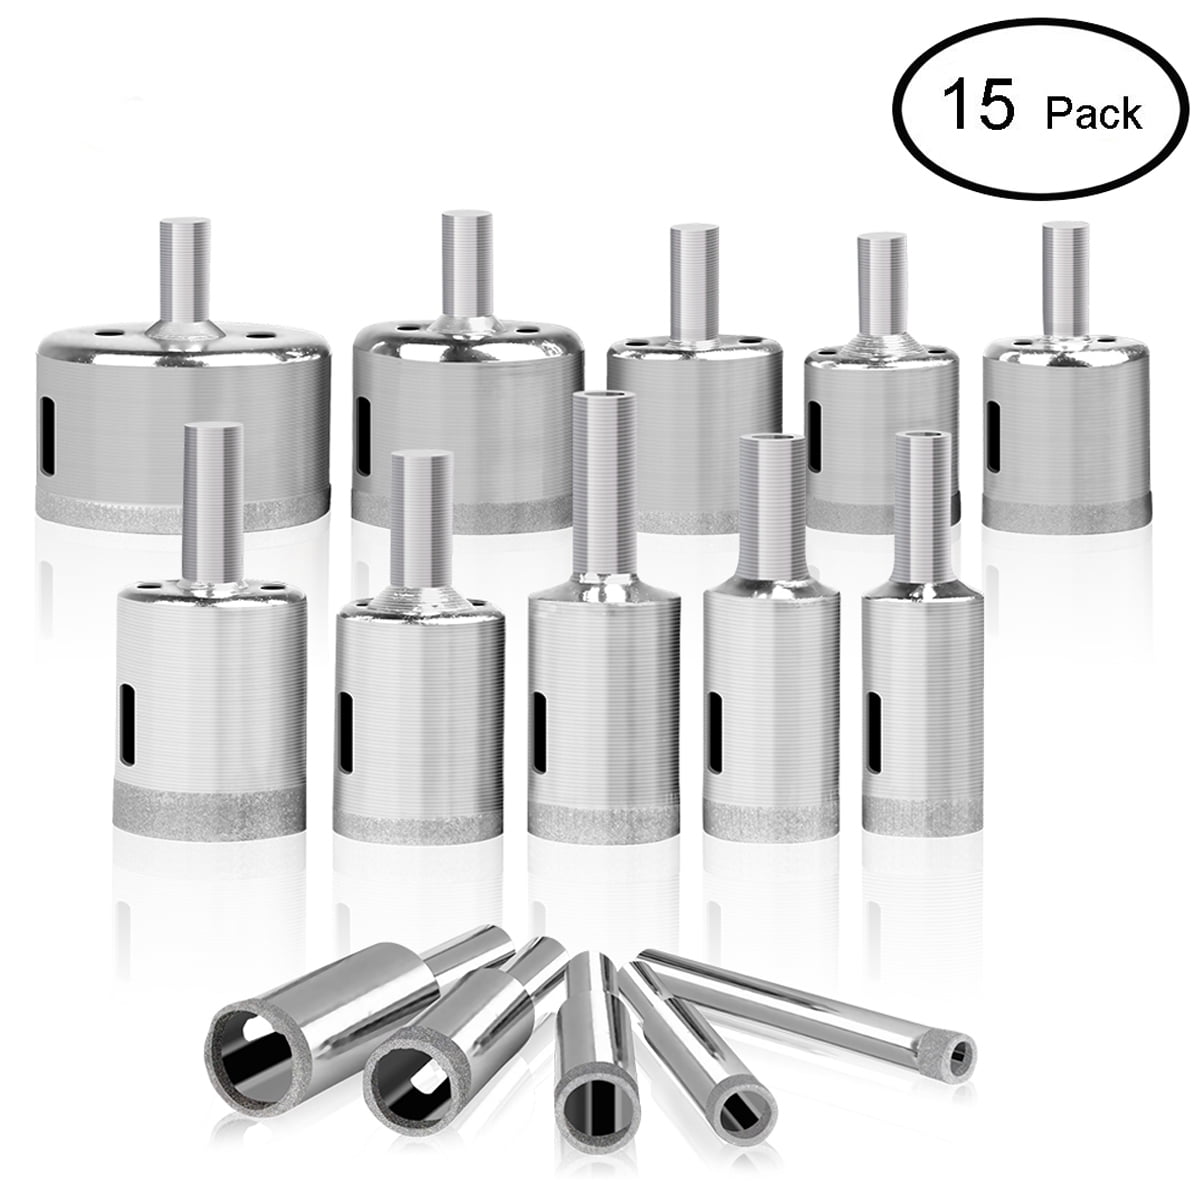 Details about   10pc Diamond Hole Saw Kit 8-50mm Grit Drill Bits Set for Glass Ceramic Tile 